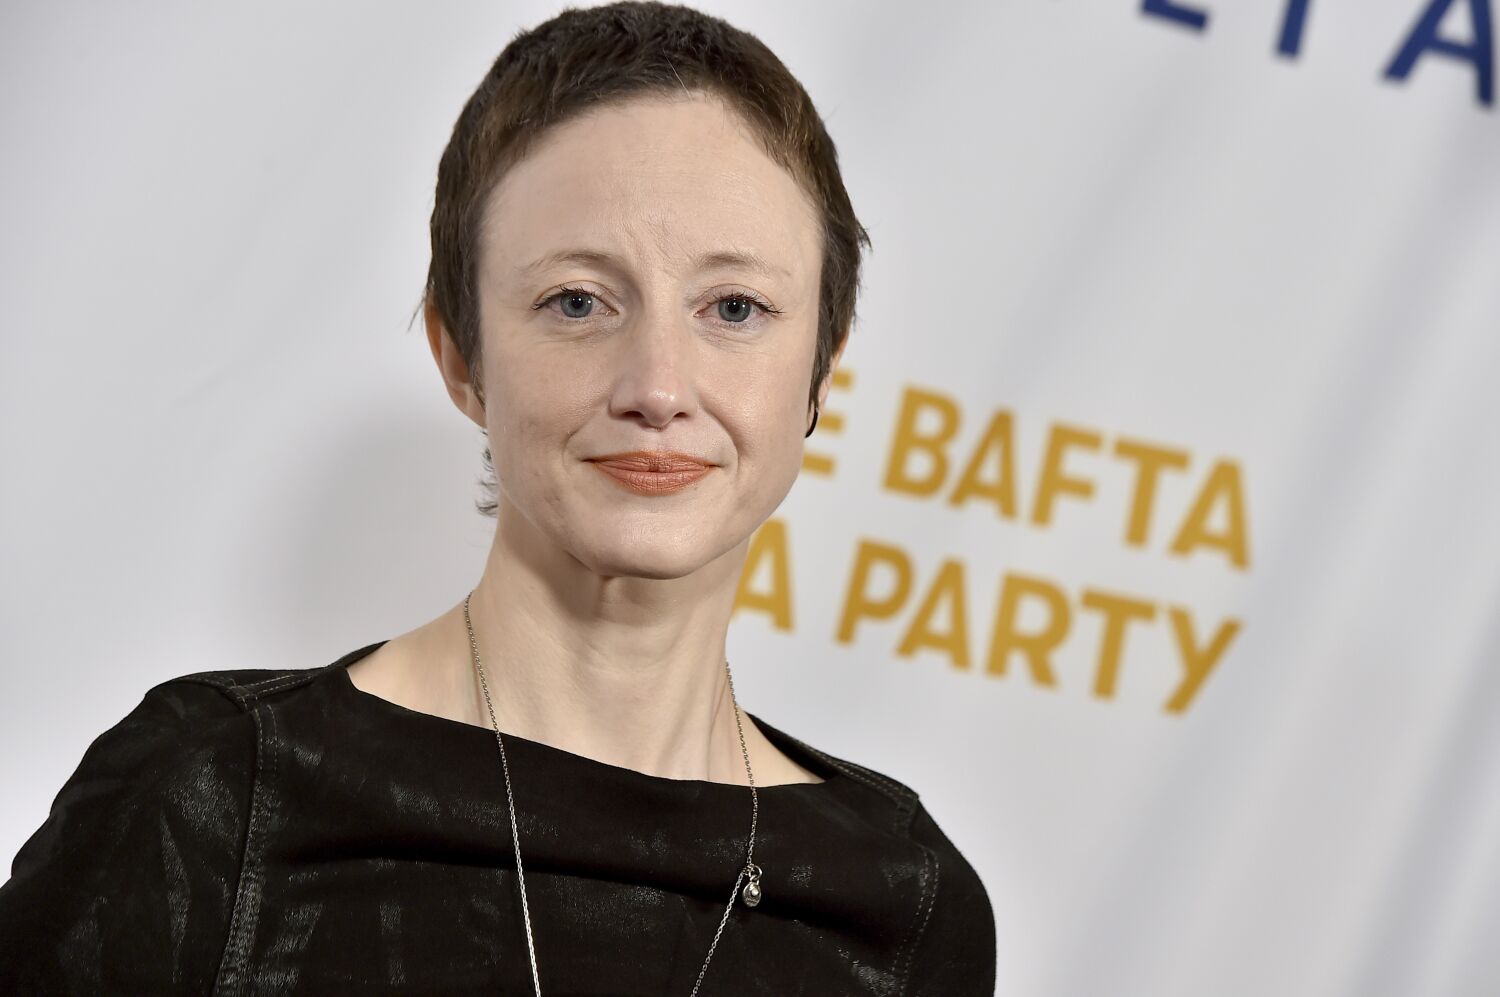  Andrea Riseborough says the uproar over surprise Oscar nom 'has deeply impacted me'